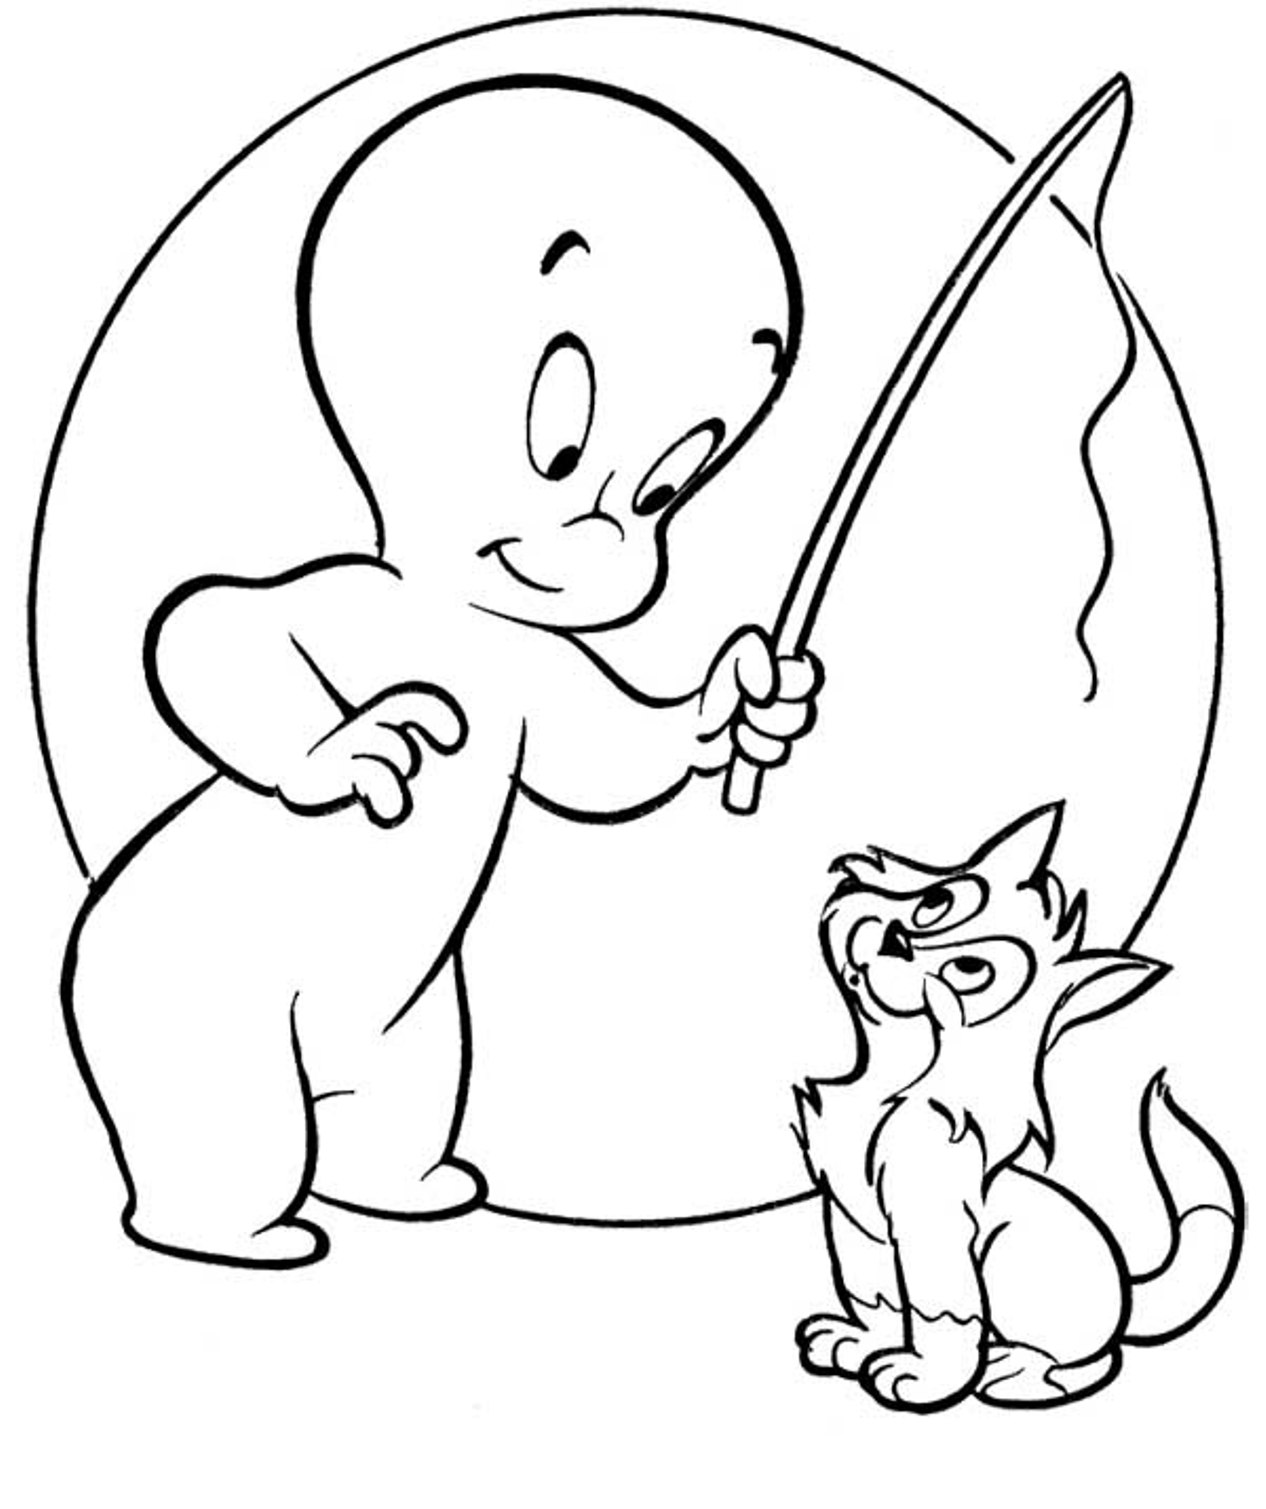 coloring-pages-ghosts-coloring-pages-and-clip-art-free-and-printable